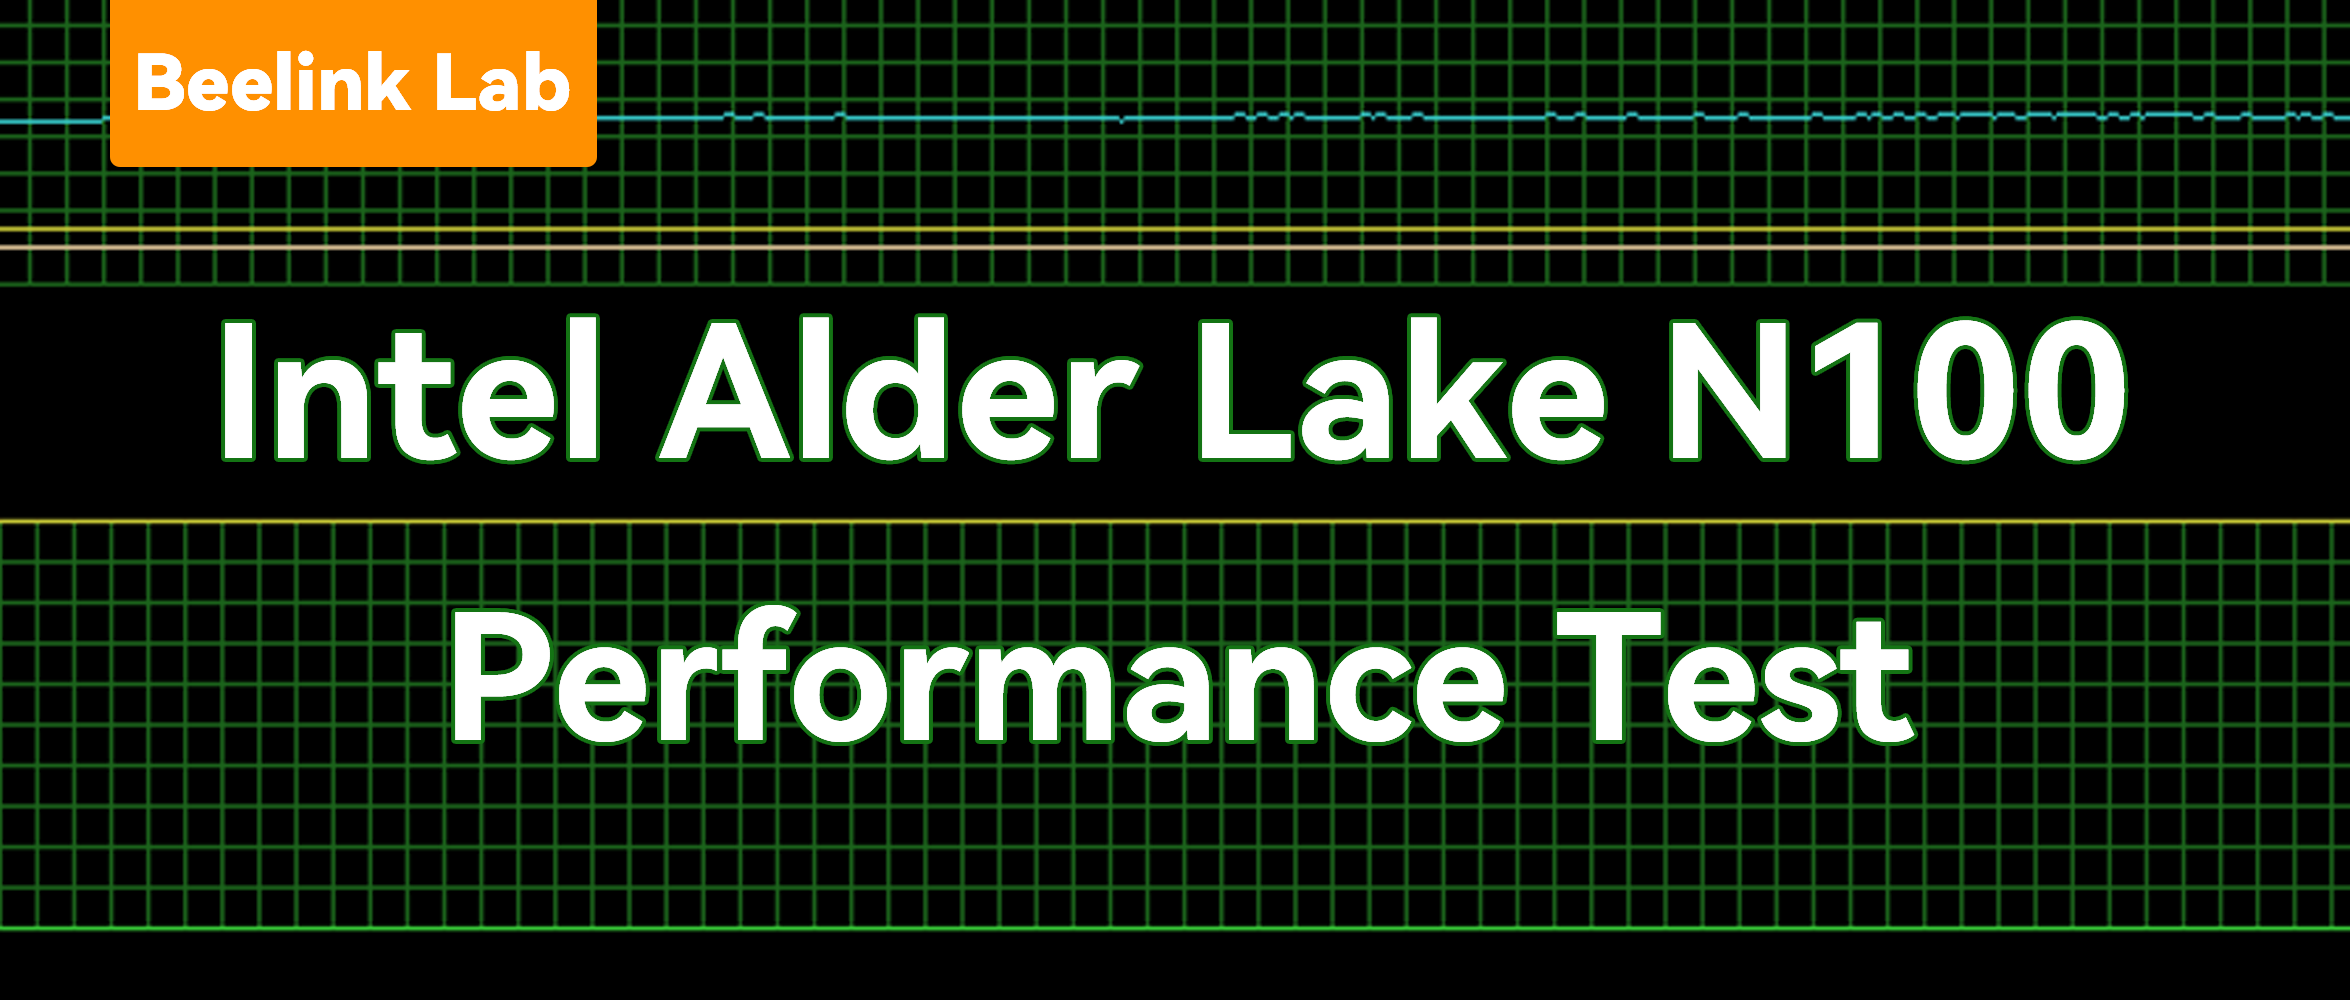 The Performance of Intel Processor Alder Lake-N100 Differs Greatly at Different TDPs